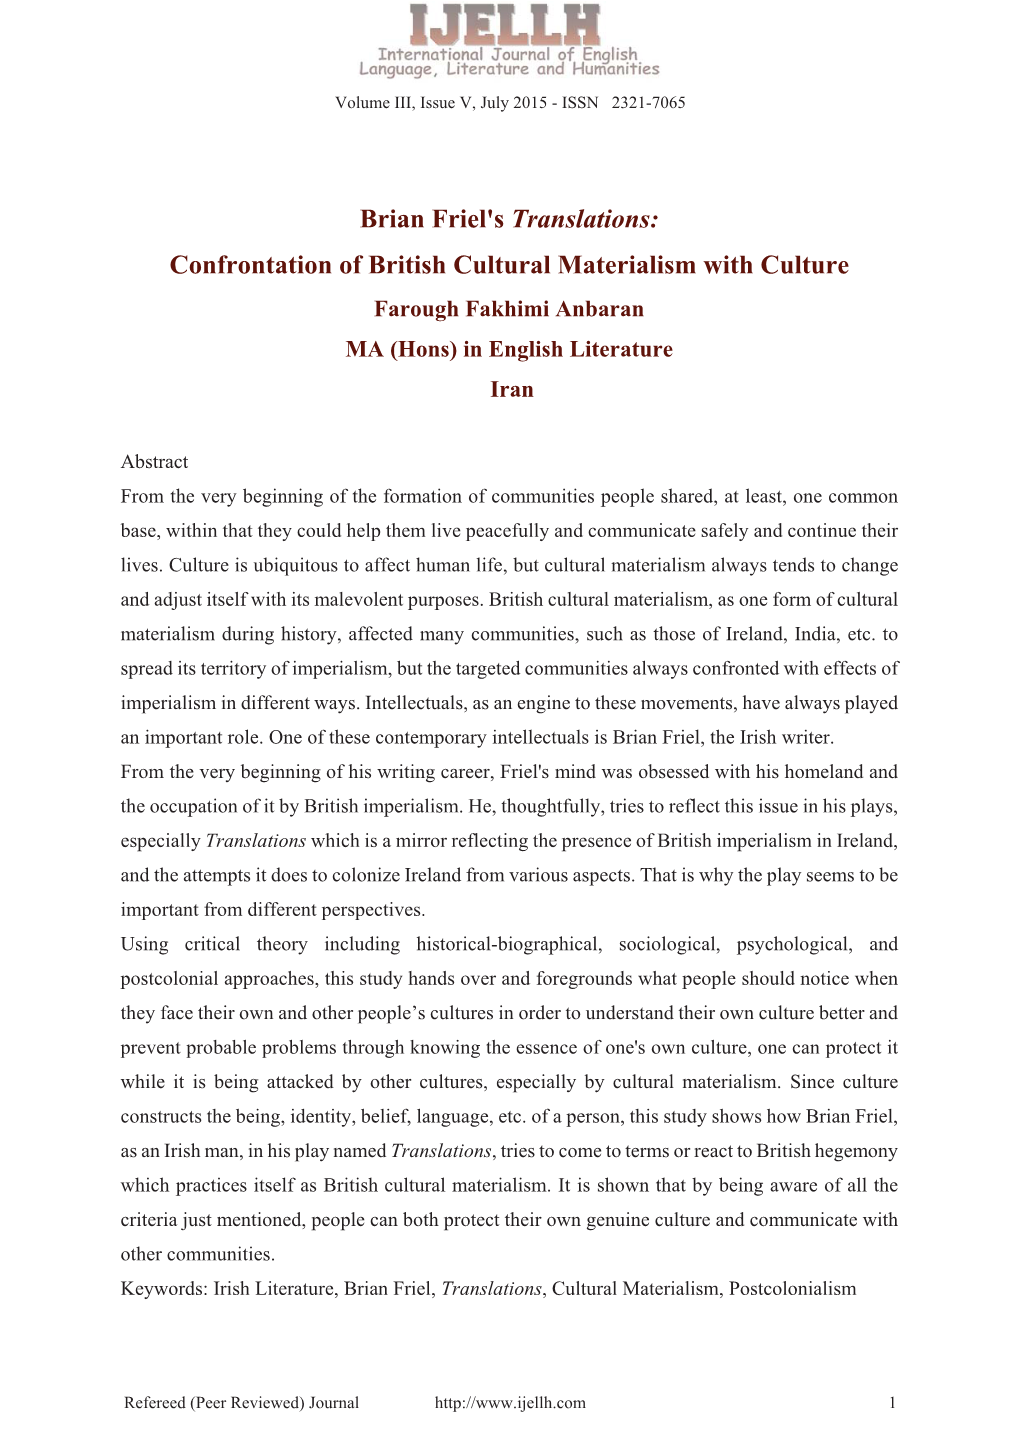 Brian Friel's Translations: Confrontation of British Cultural Materialism with Culture Farough Fakhimi Anbaran MA (Hons) in English Literature Iran